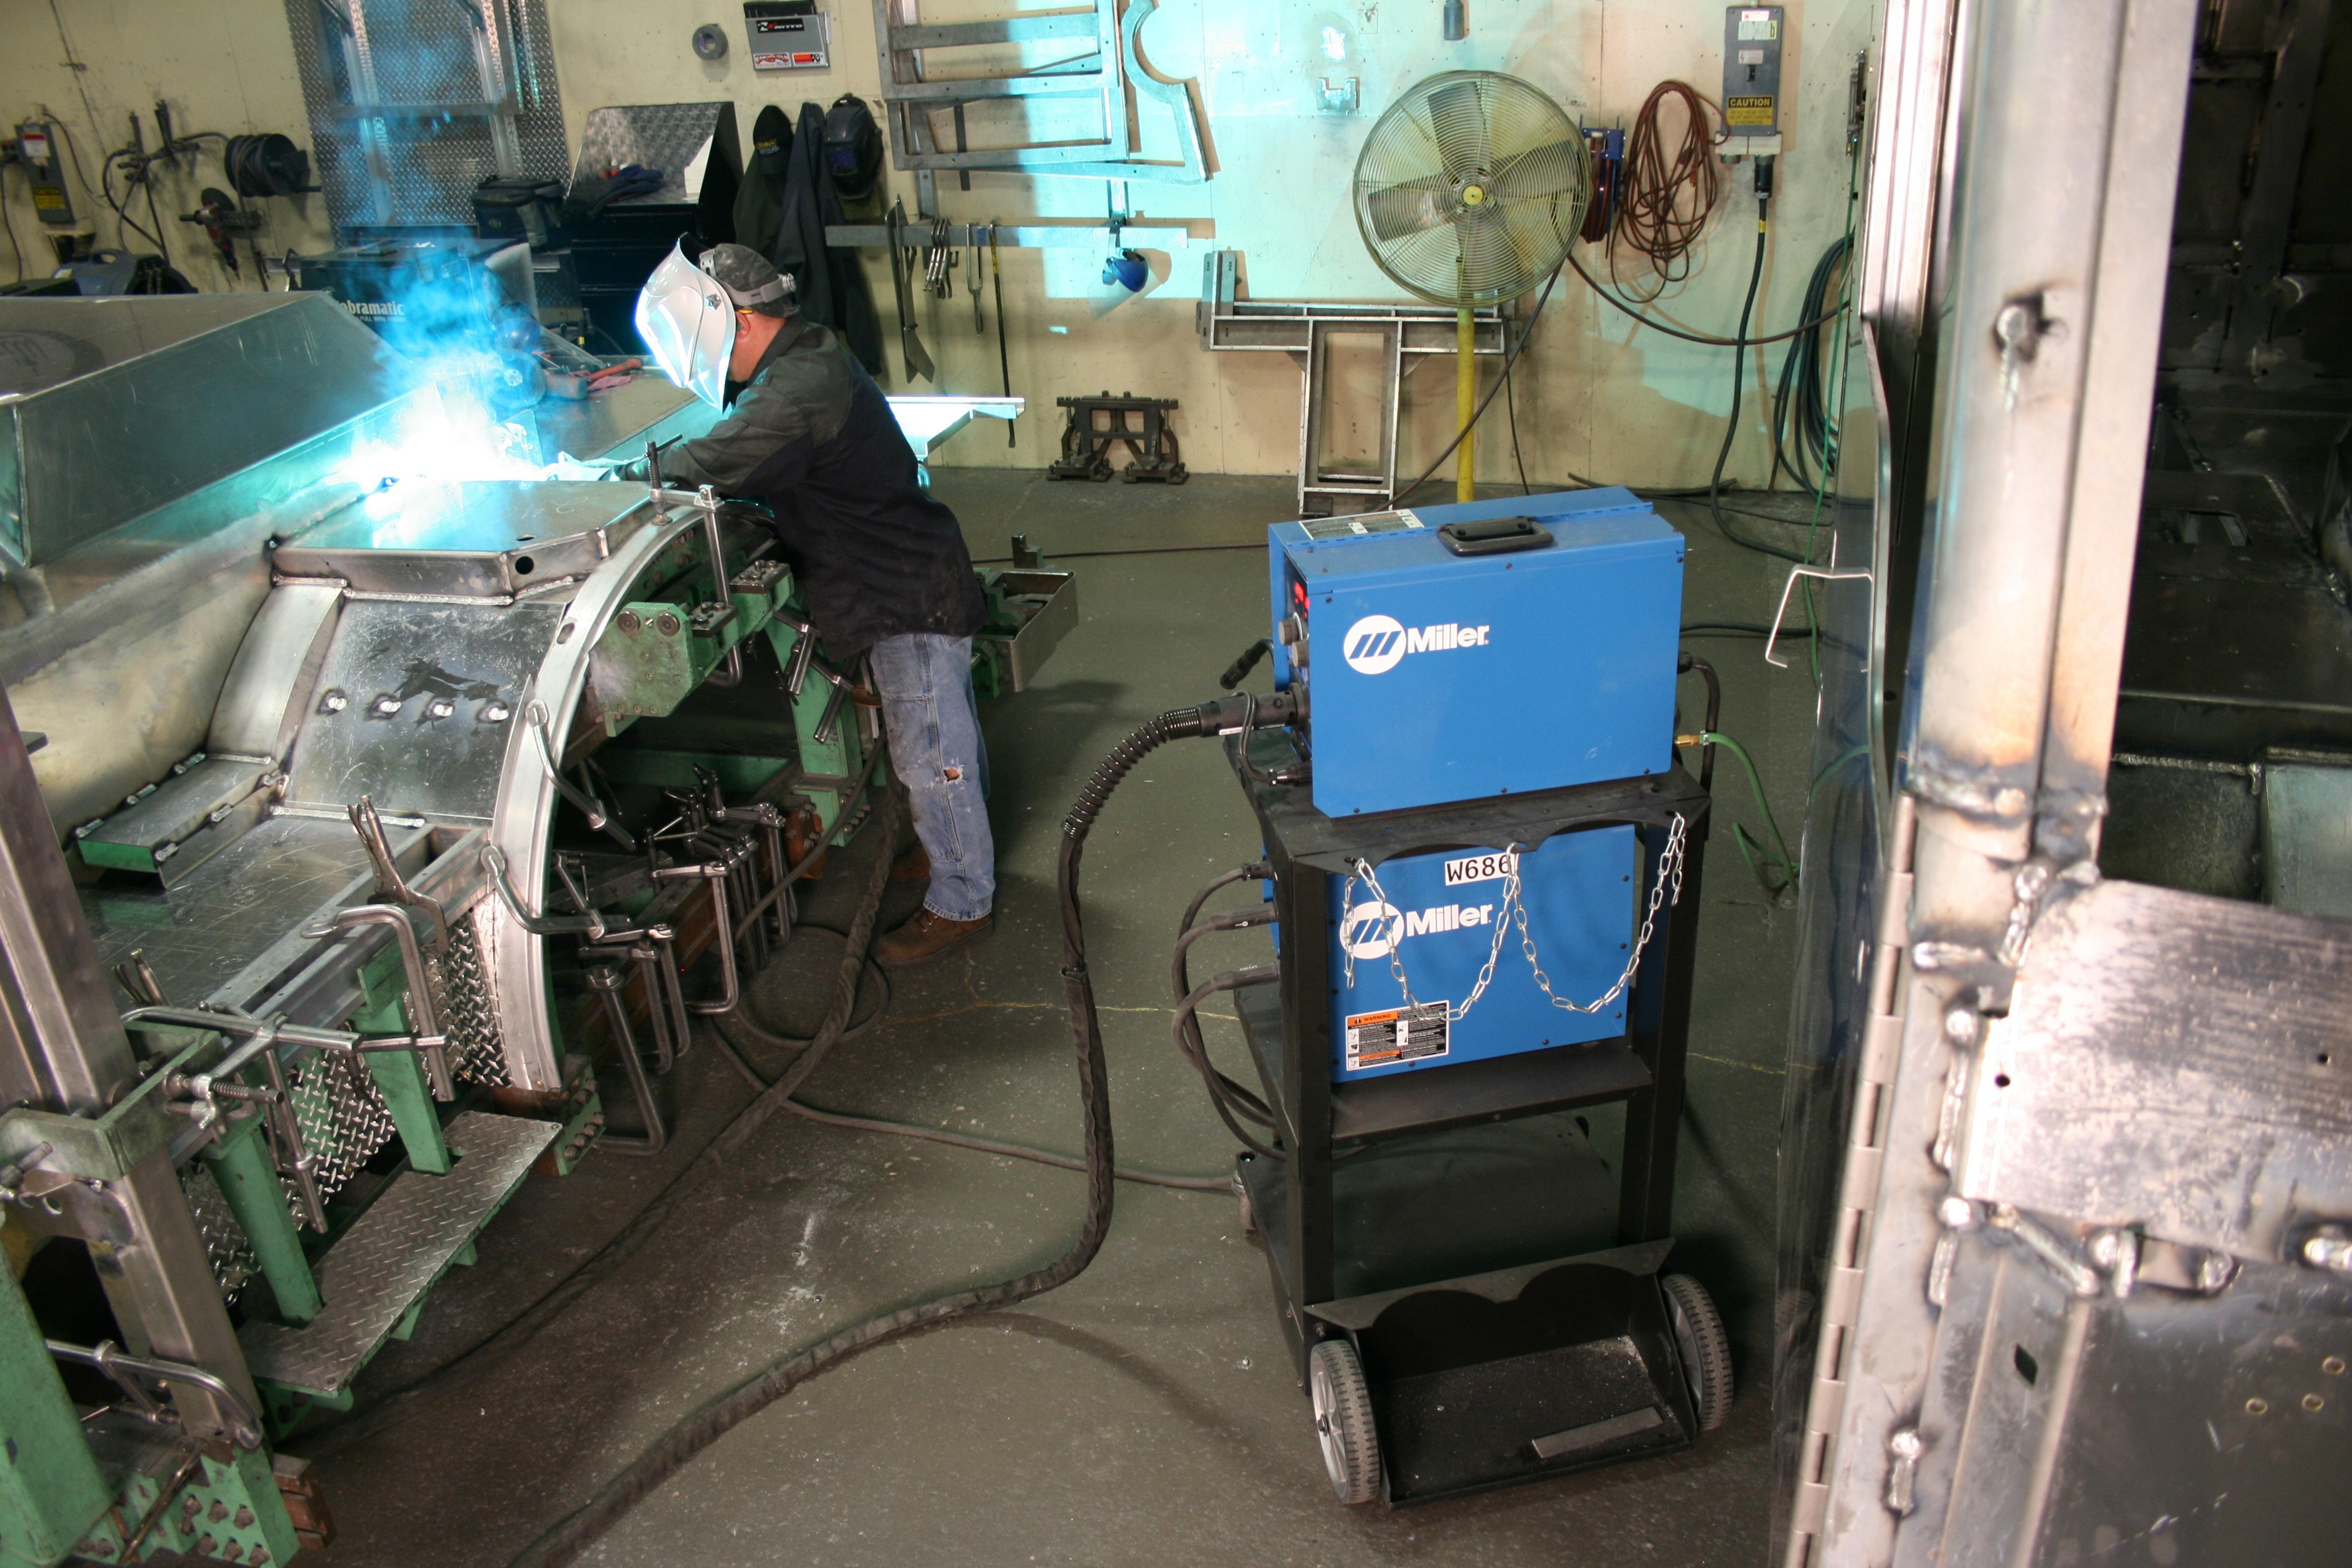 Technology advances have made Pulsed MIG welding even more viable in aluminum applications where increased production speed is desired without sacrificing quality or appearance.